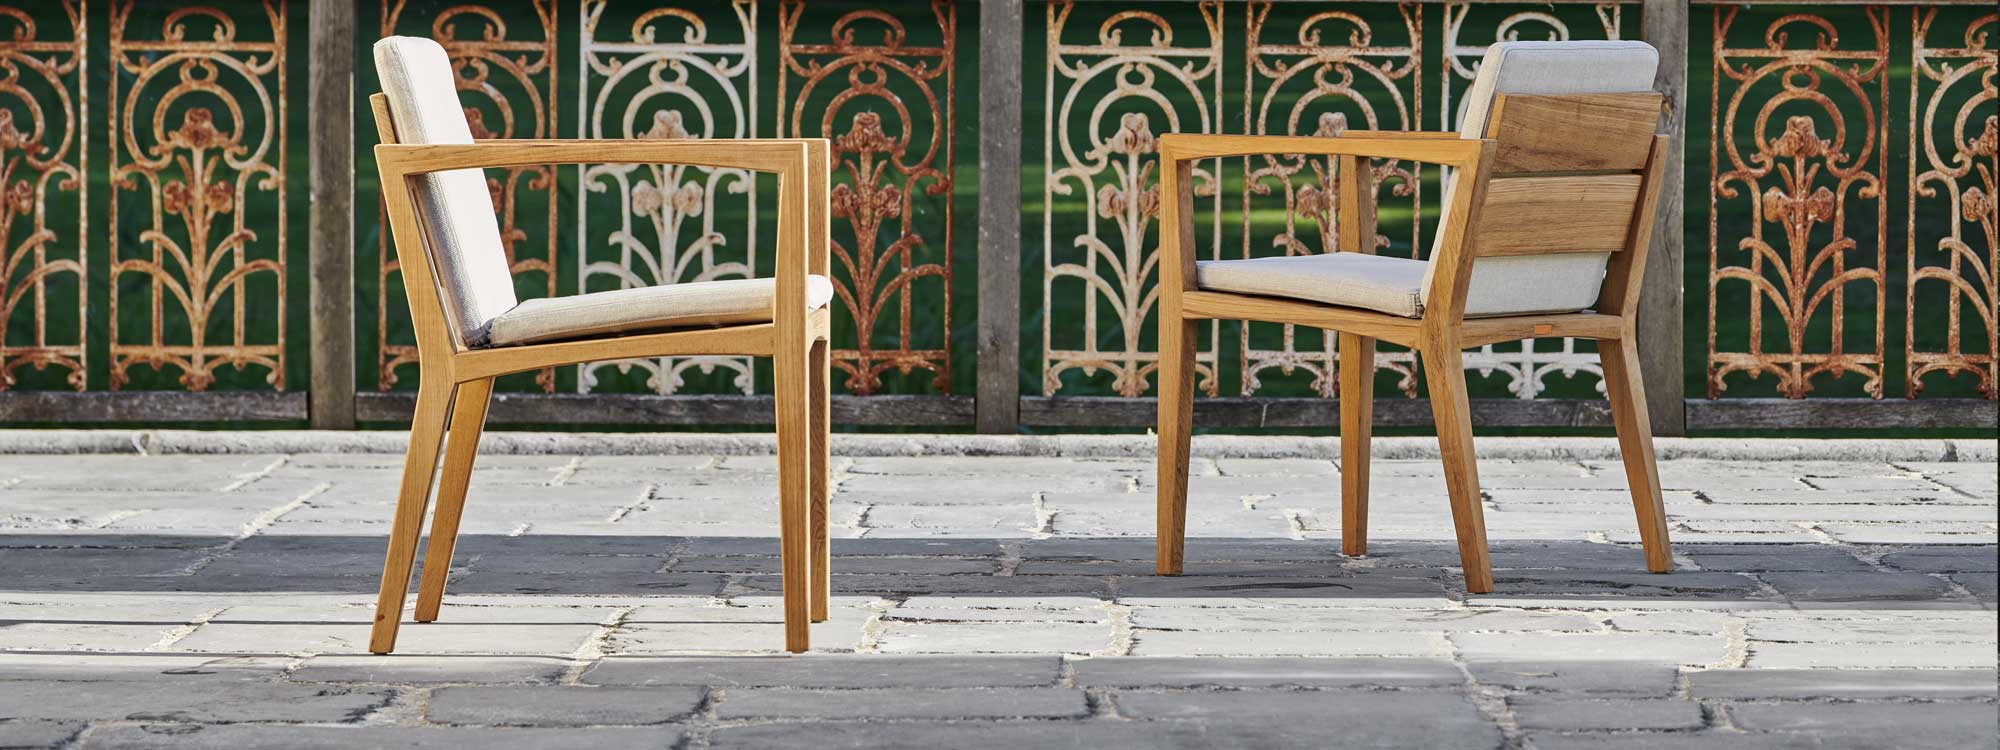 Zenhit outdoor dining chairs by Royal Botania